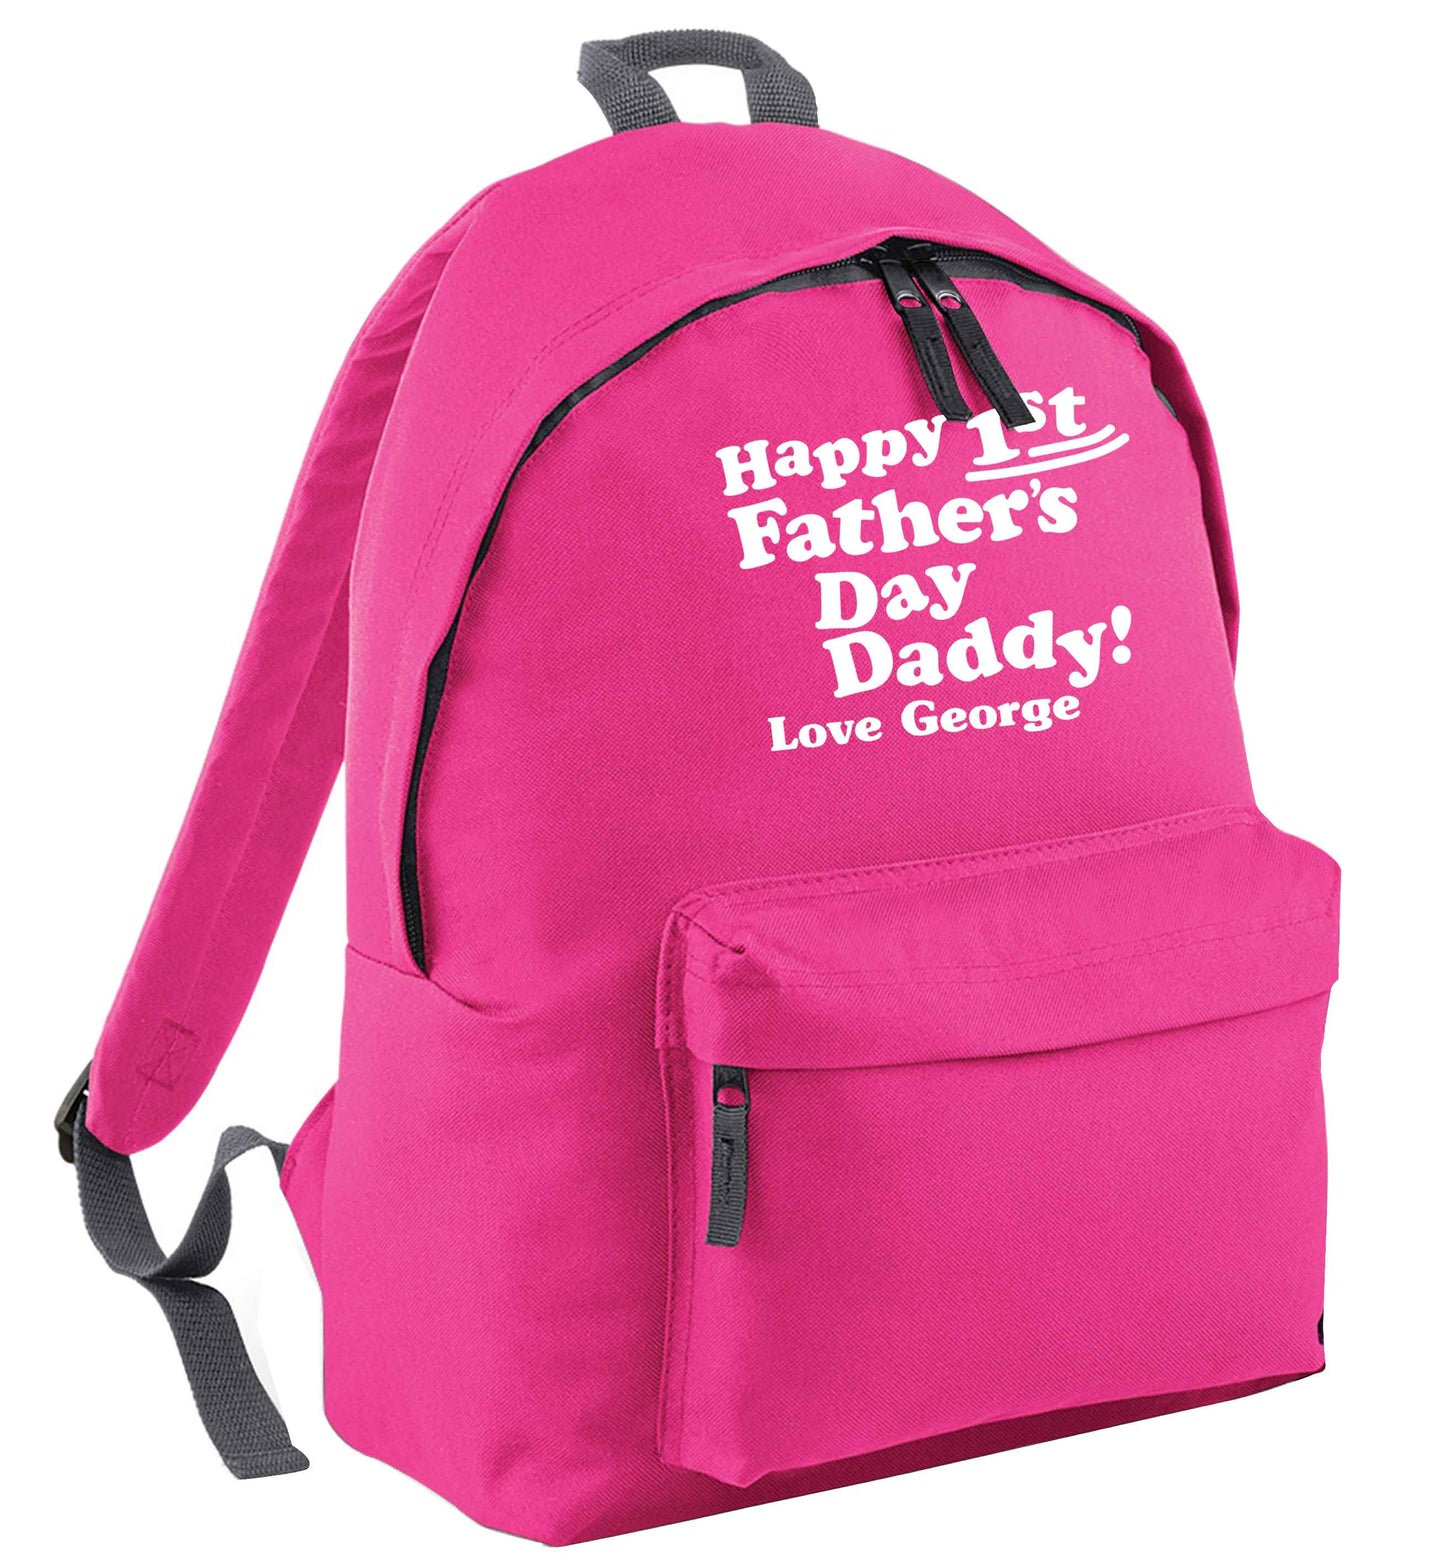 Happy first Fathers Day daddy love personalised pink adults backpack